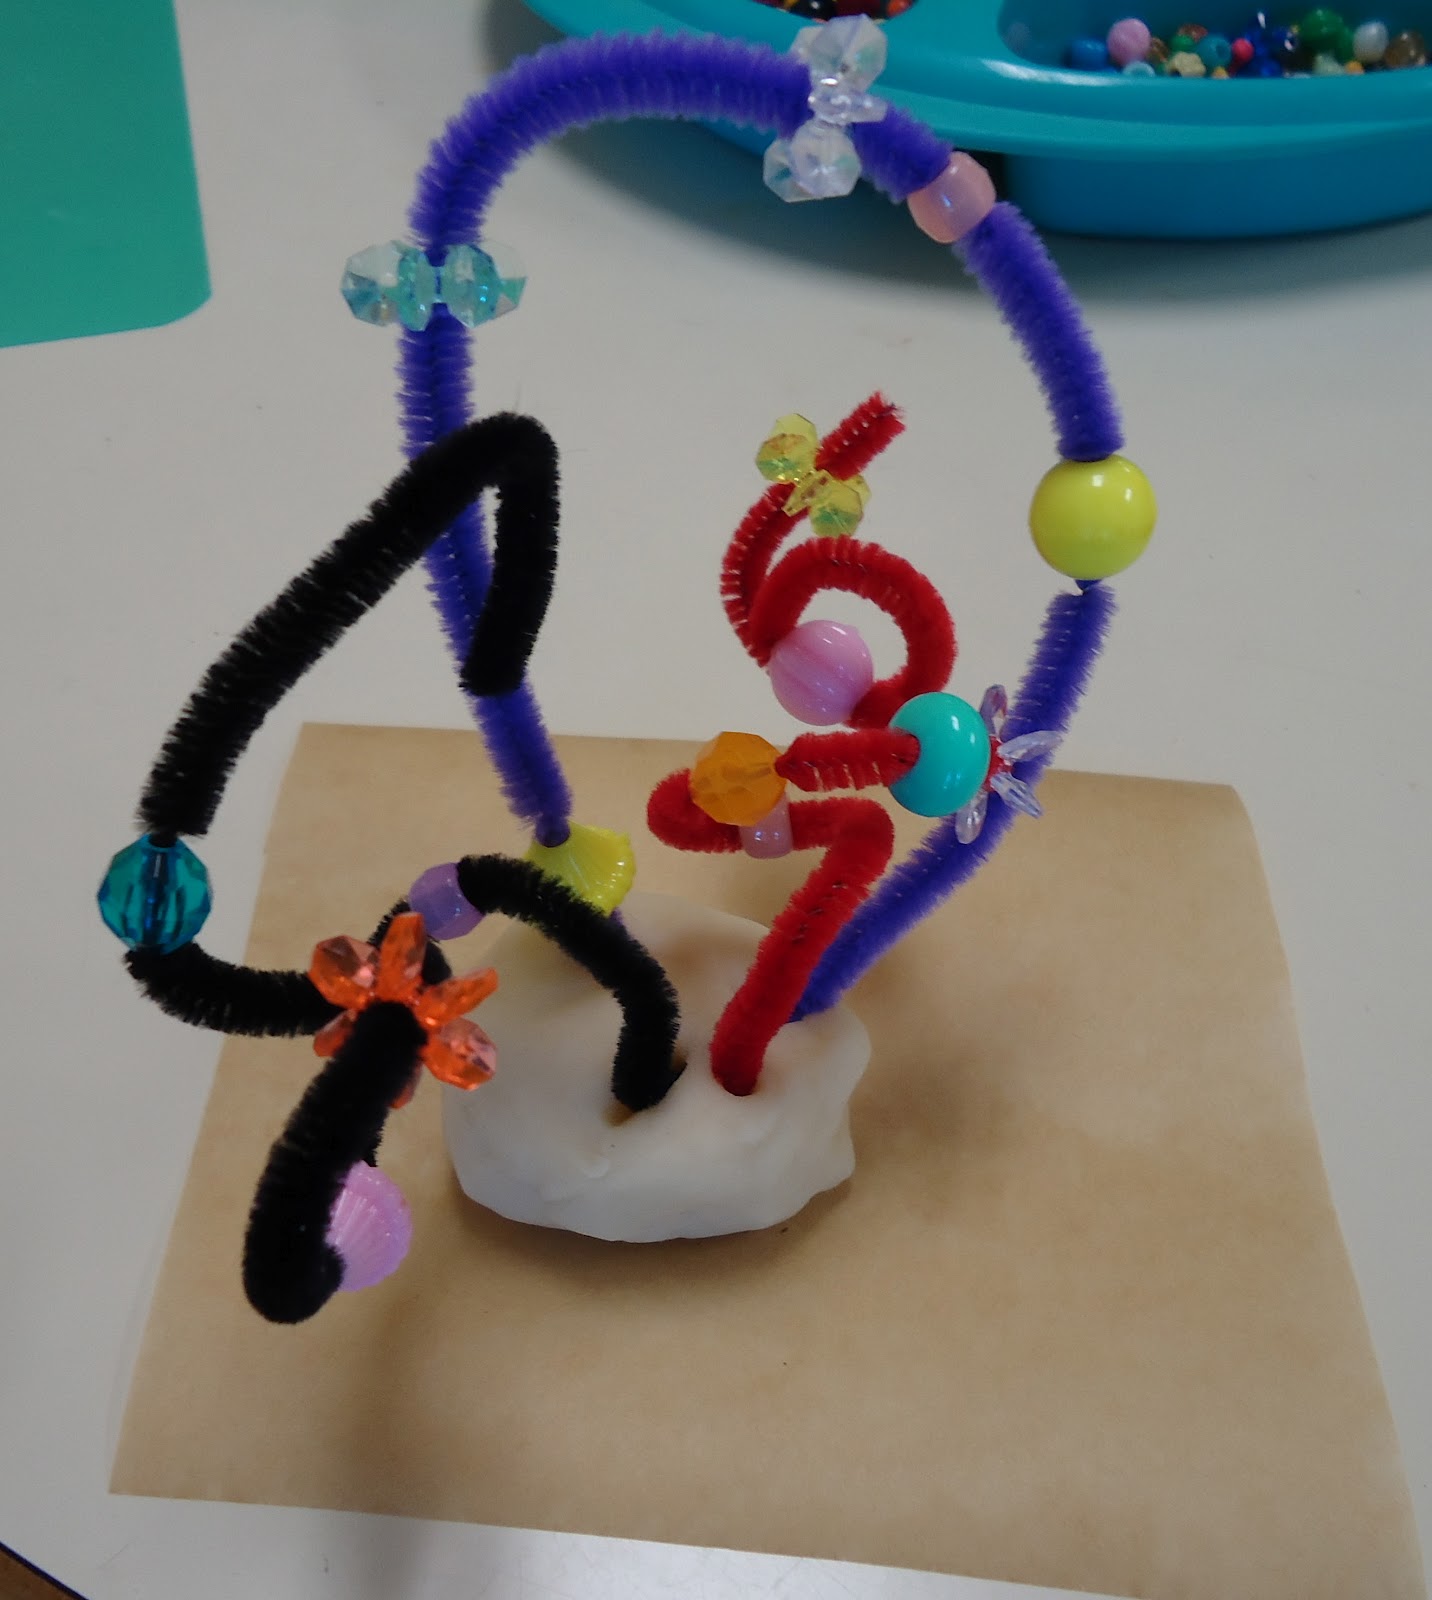 To the Lesson! Pipe Cleaner Sculptures